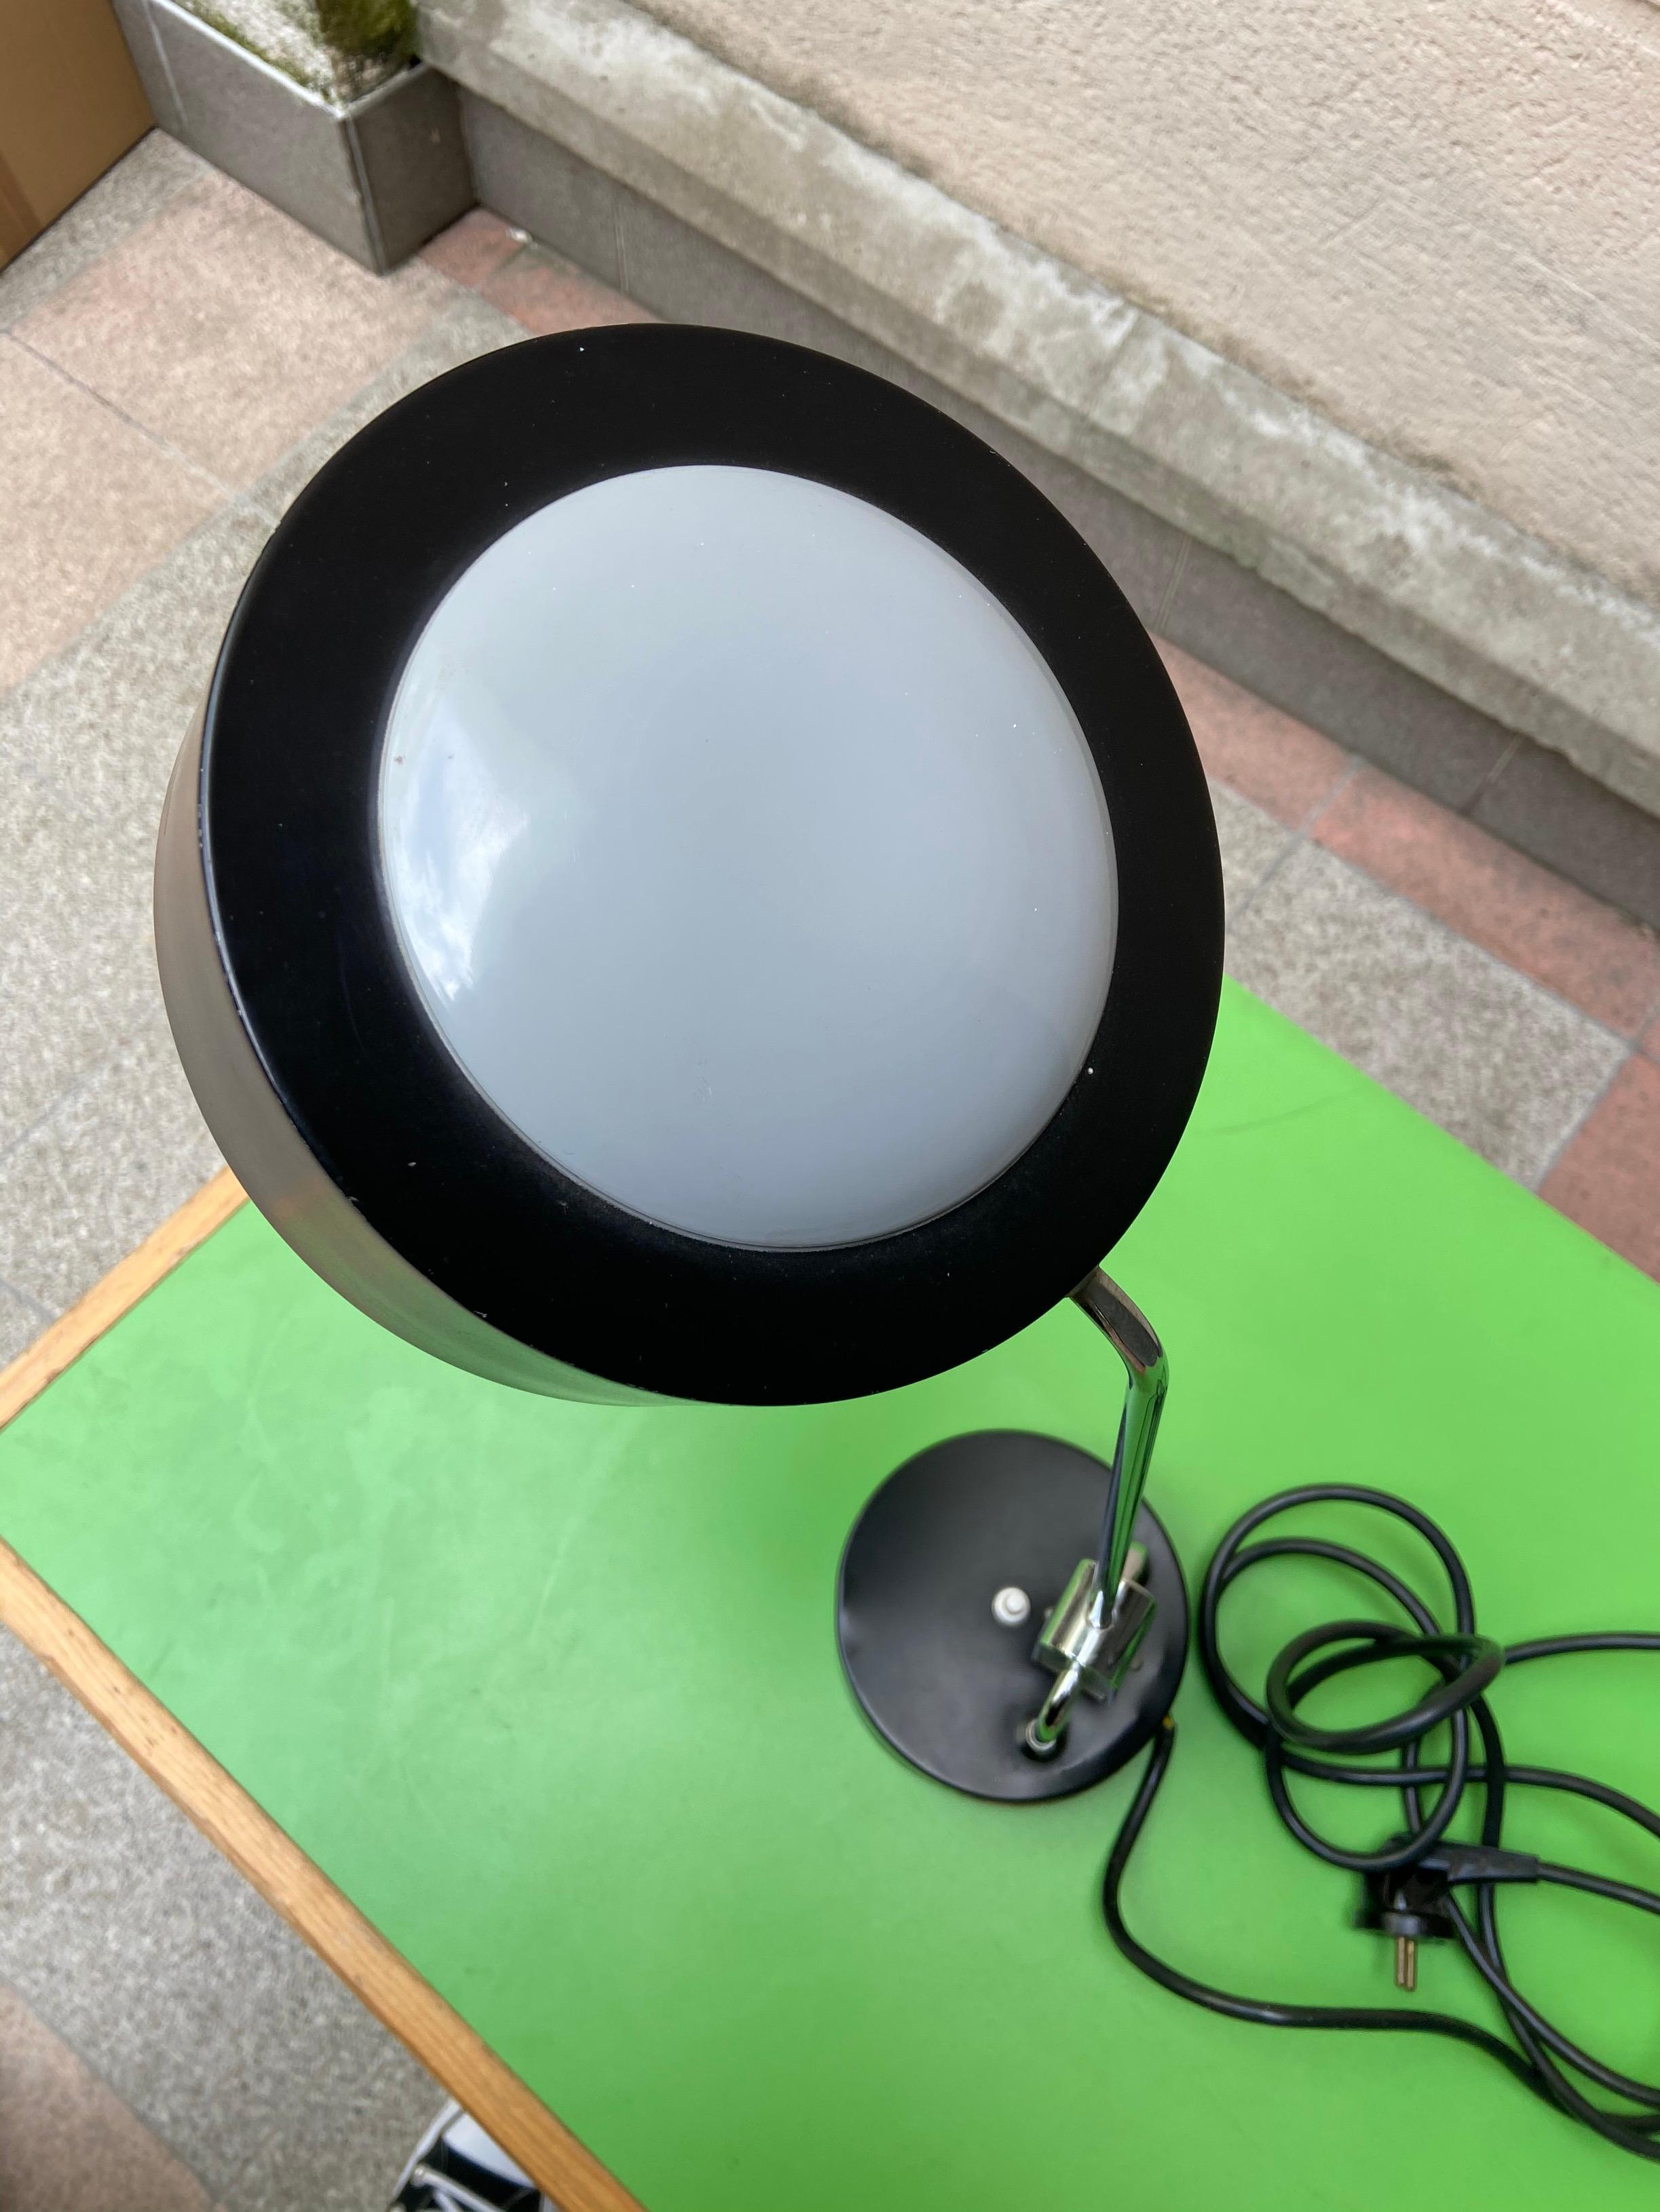 Desk lamp, Charlotte Perriand
Jumo edition
Chromed and matte black lacquered metal, white reflector, two ball joints, circular base.
Original wiring, works.
Bayonet socket. Cast iron base,
Circa 1940
Measures: H 50 x D 17.5
290€.